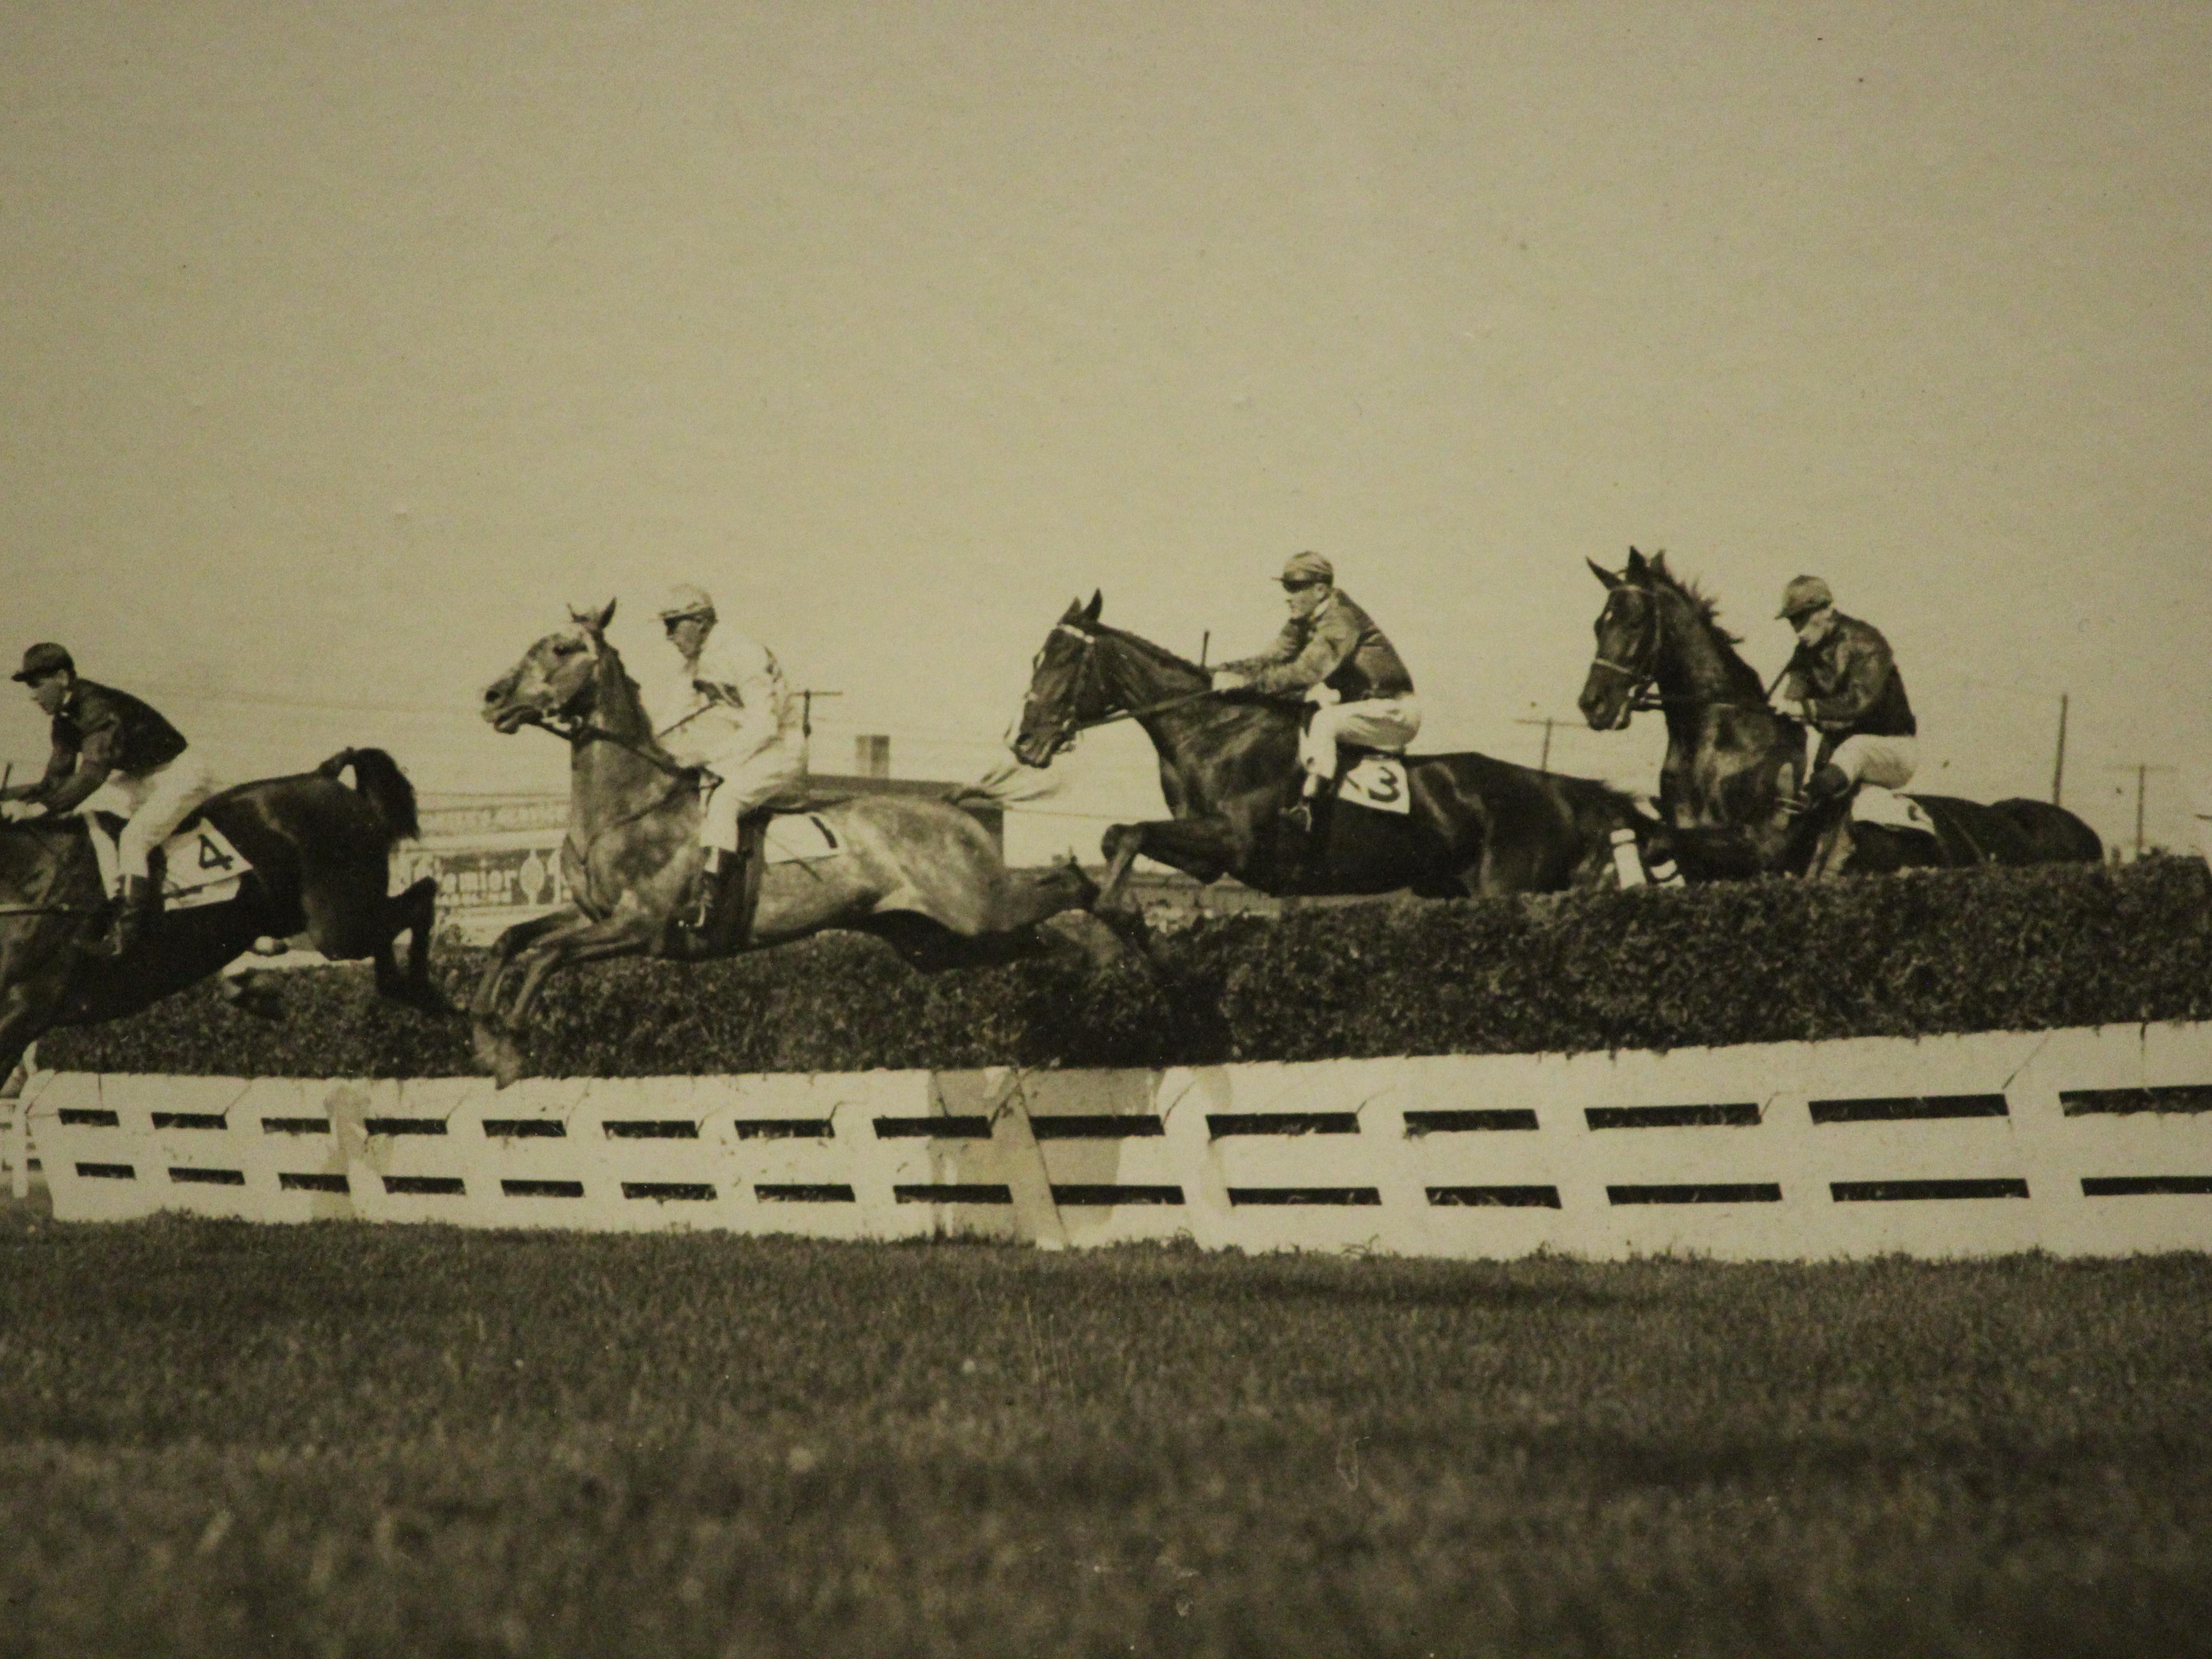 Classic B&W photo depicting the 'Henrie Memorial Steeplechase' from October 3, 1925 at Woodbine Park, Toronto, Canada

Photo Sz: 8